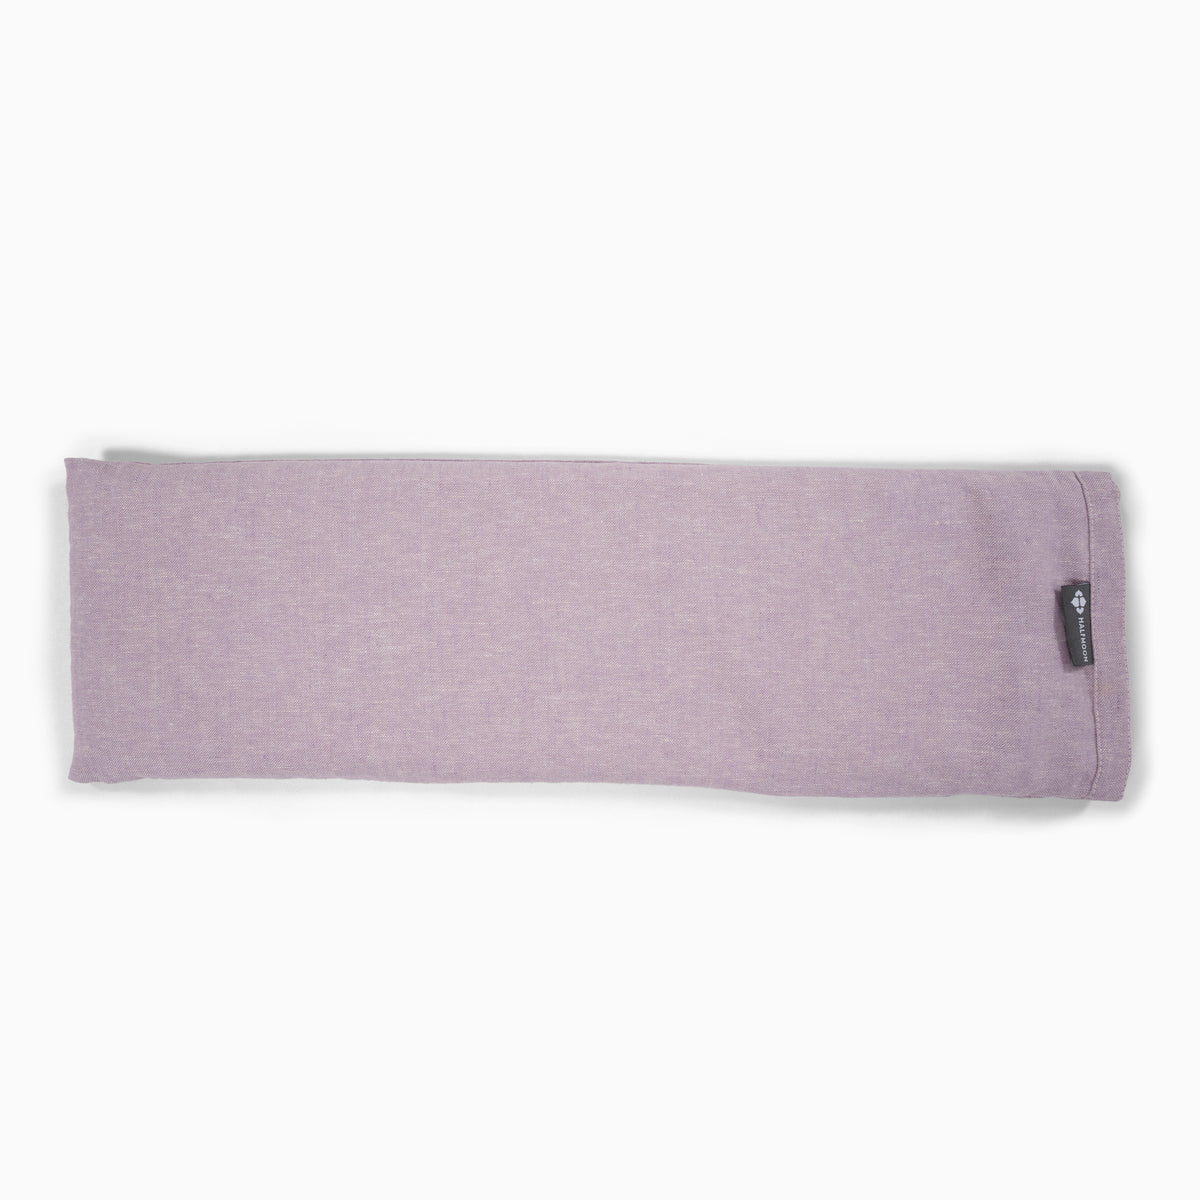 Halfmoon Hot + Cold Therapy Pillow Iris